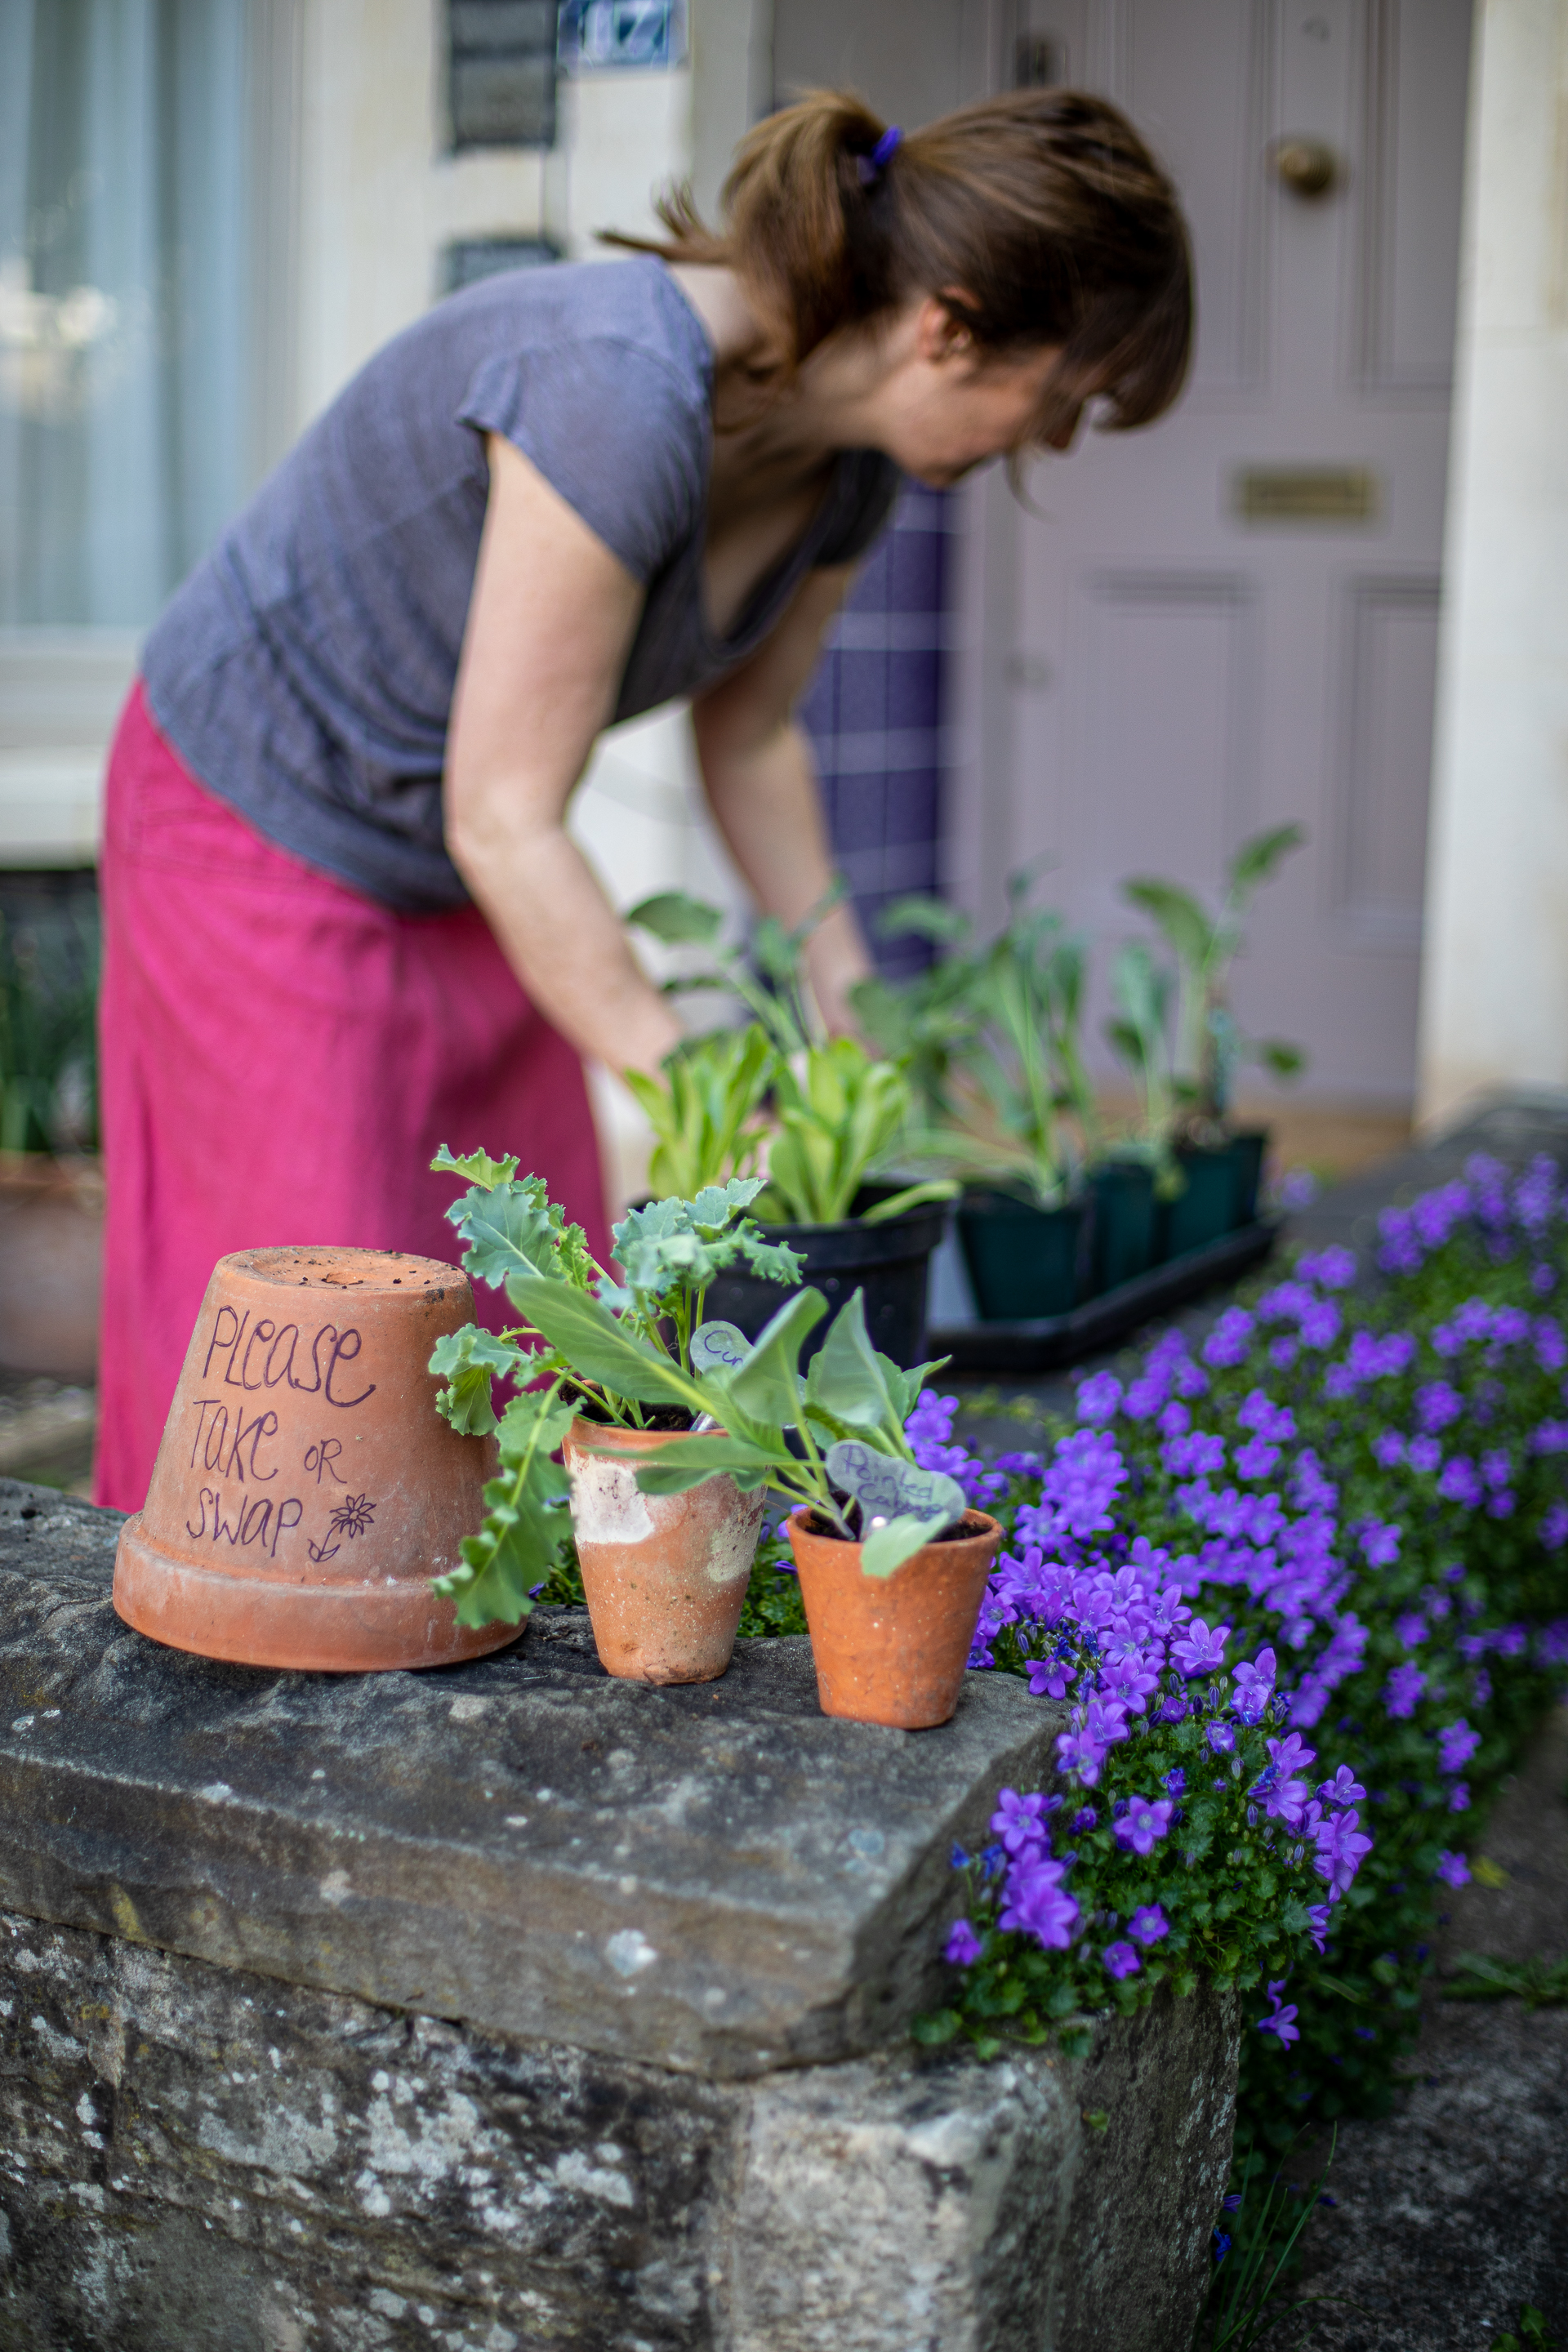 Swap or share your spare plants (Tory McTernan/PA)